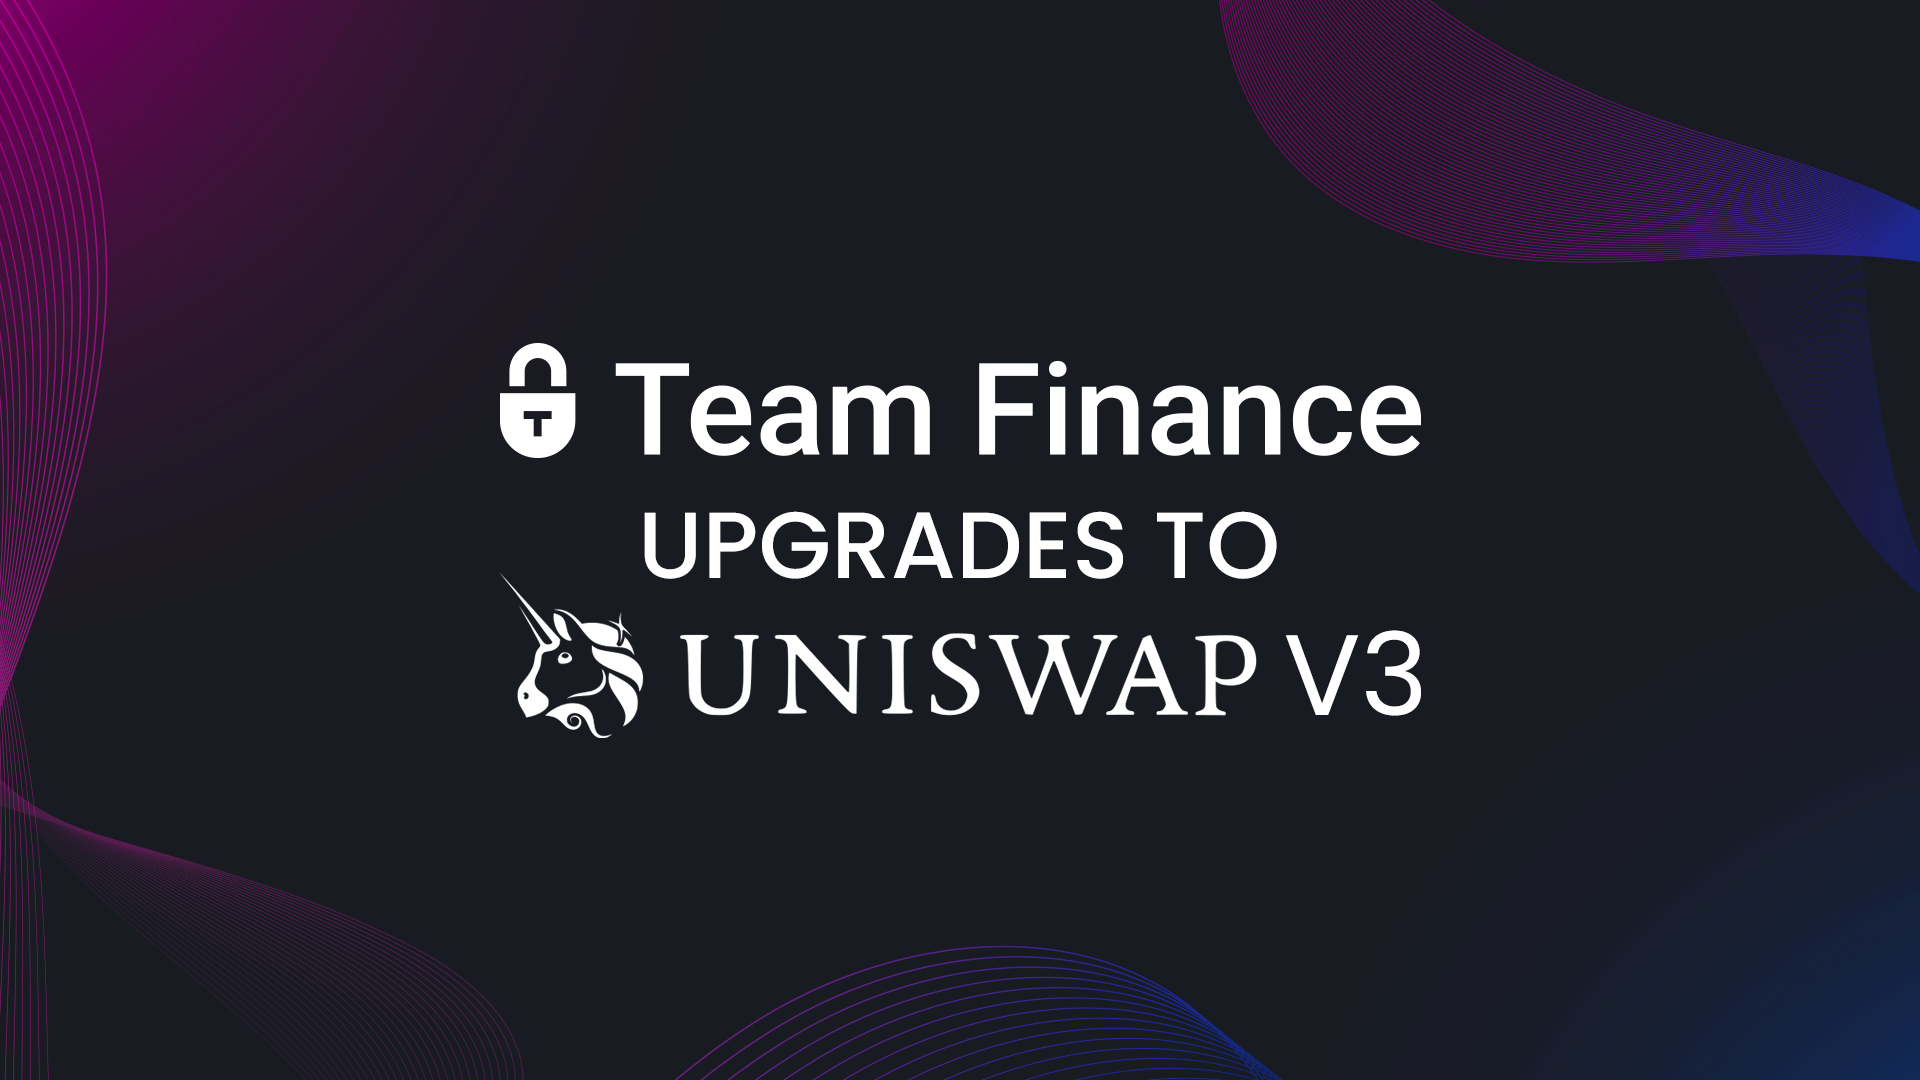 Uniswap V3 is now supported by Team Finance